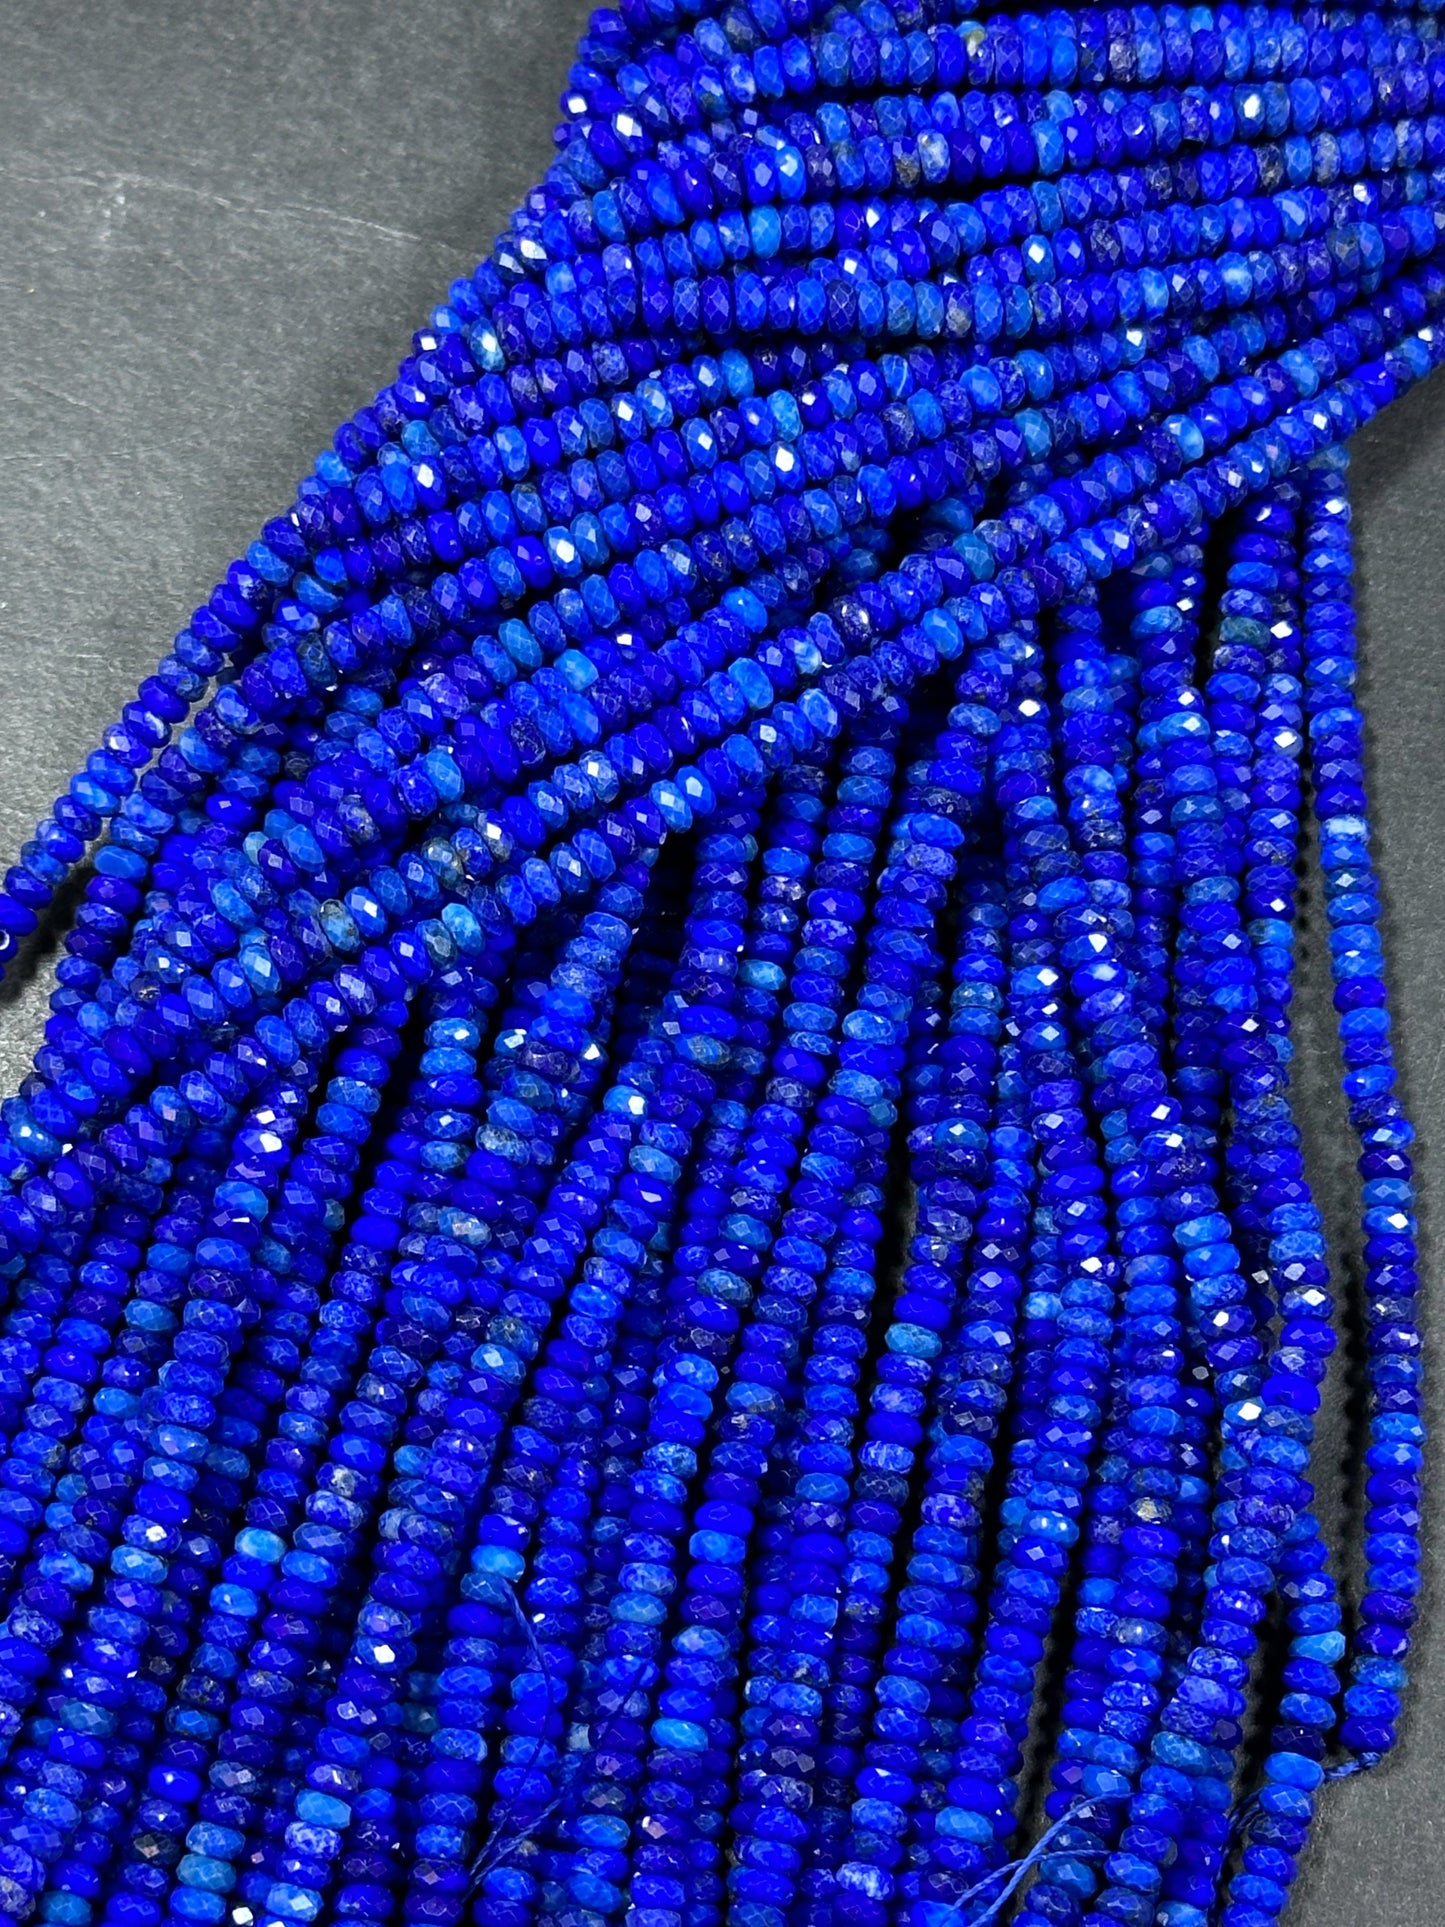 AAA Natural Lapis Lazuli Gemstone Bead Faceted 2x4mm Rondelle Shape Bead, Gorgeous Natural Royal Blue Color Lapis Beads, Full Strand 15.5"